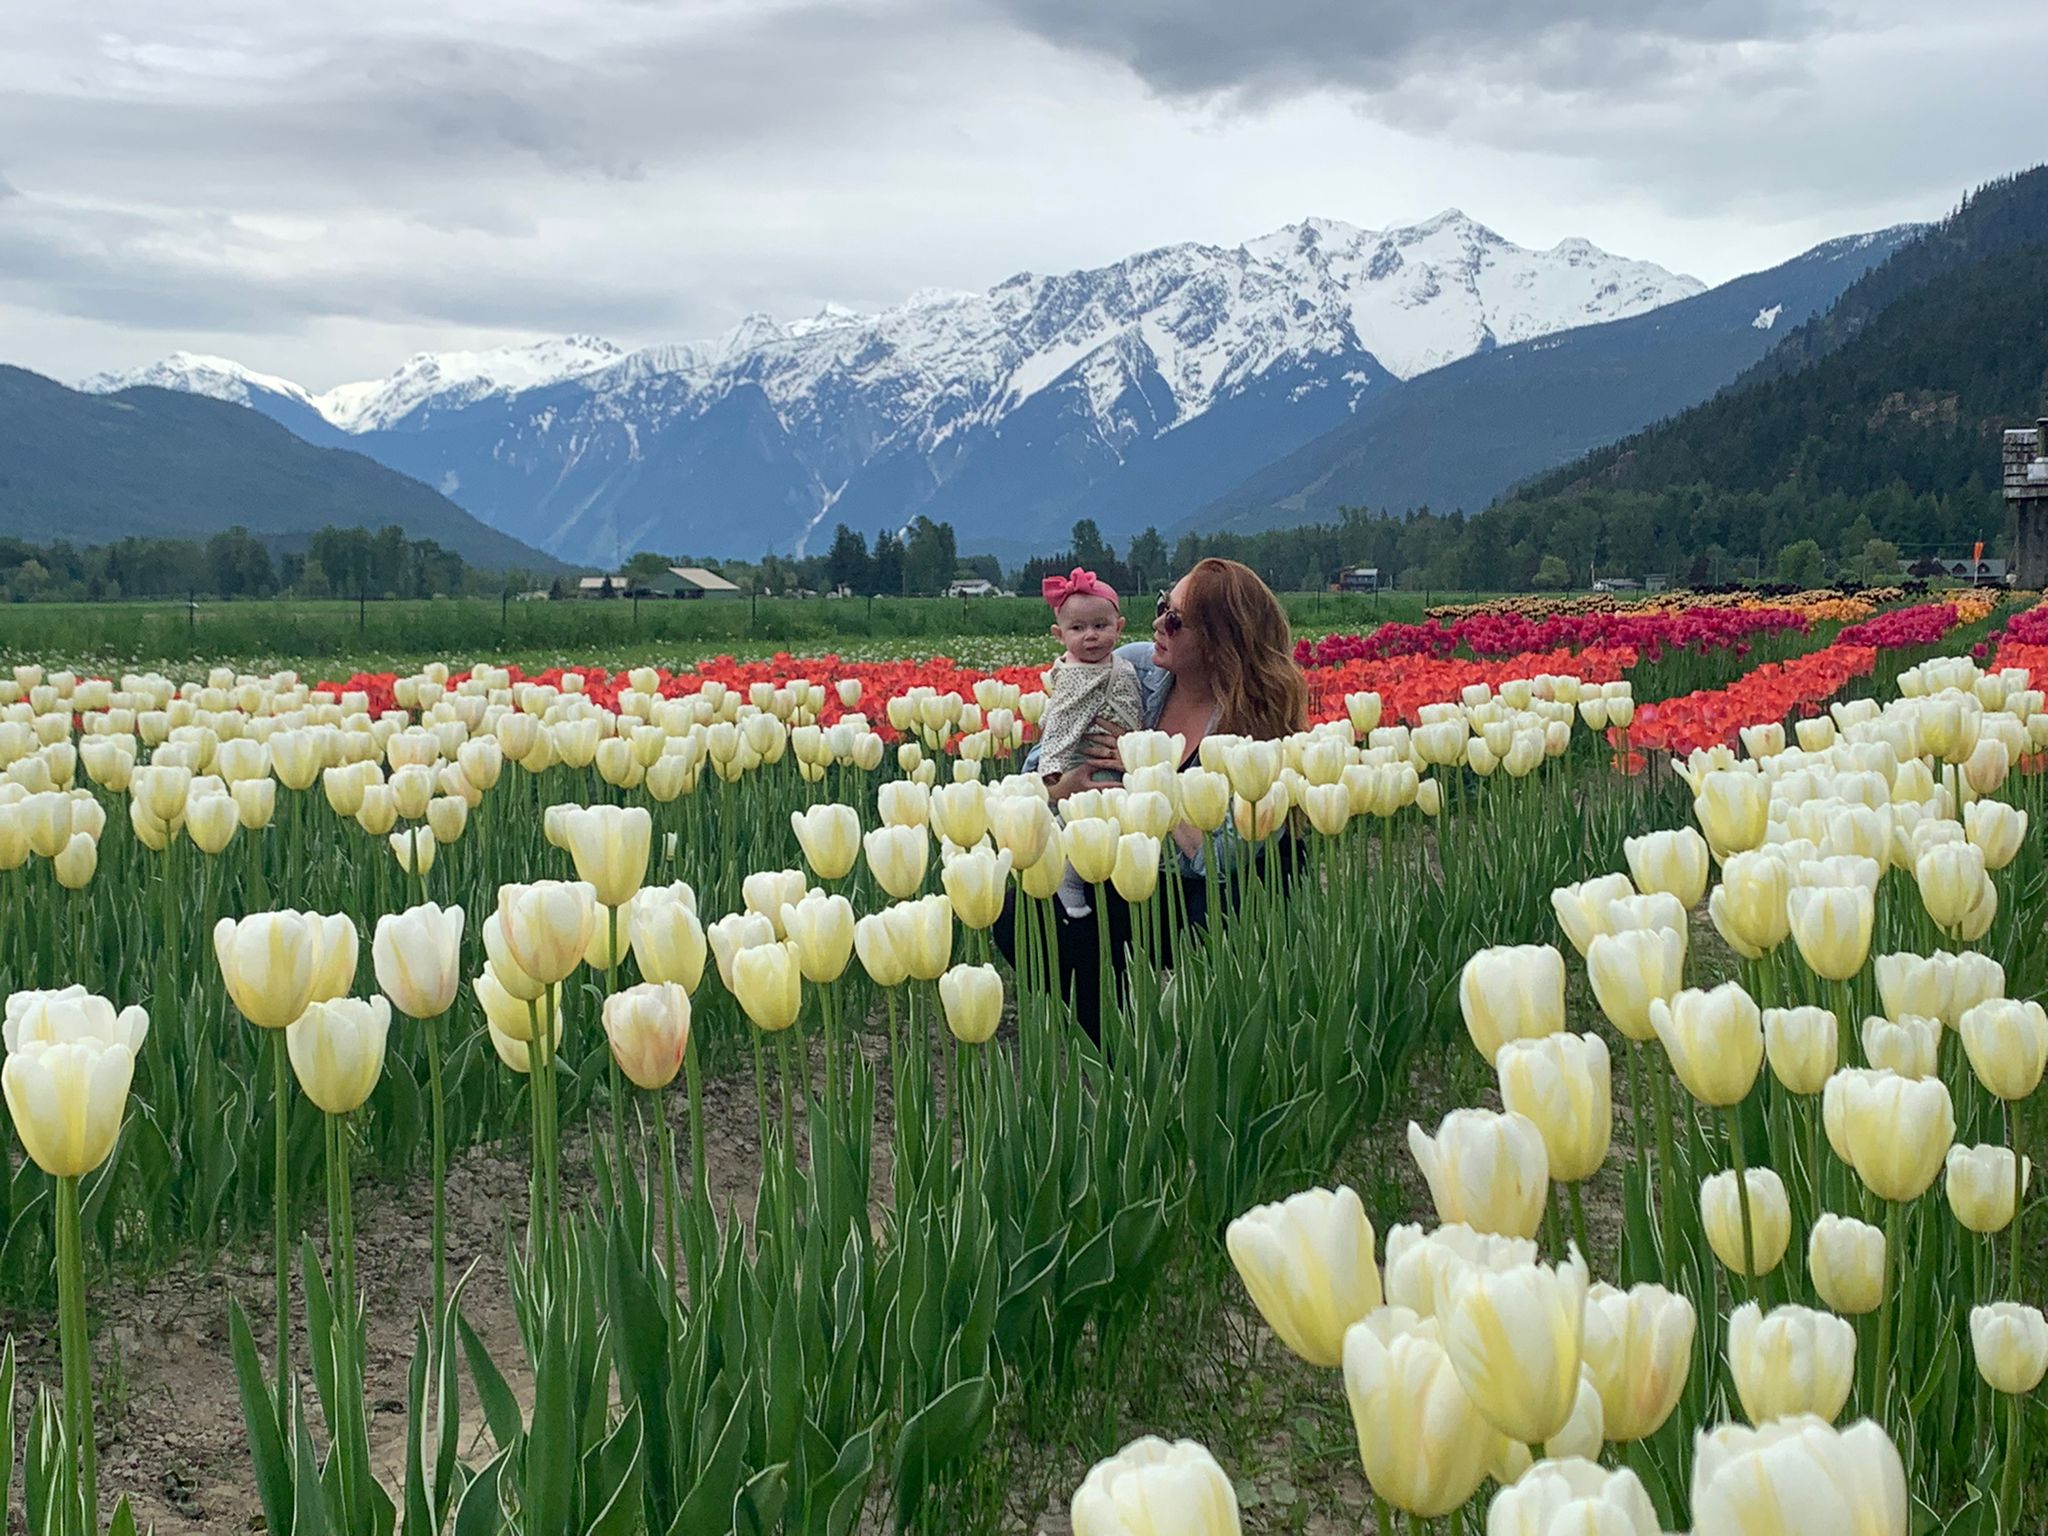 Kristi and her daughter in a field of tulips